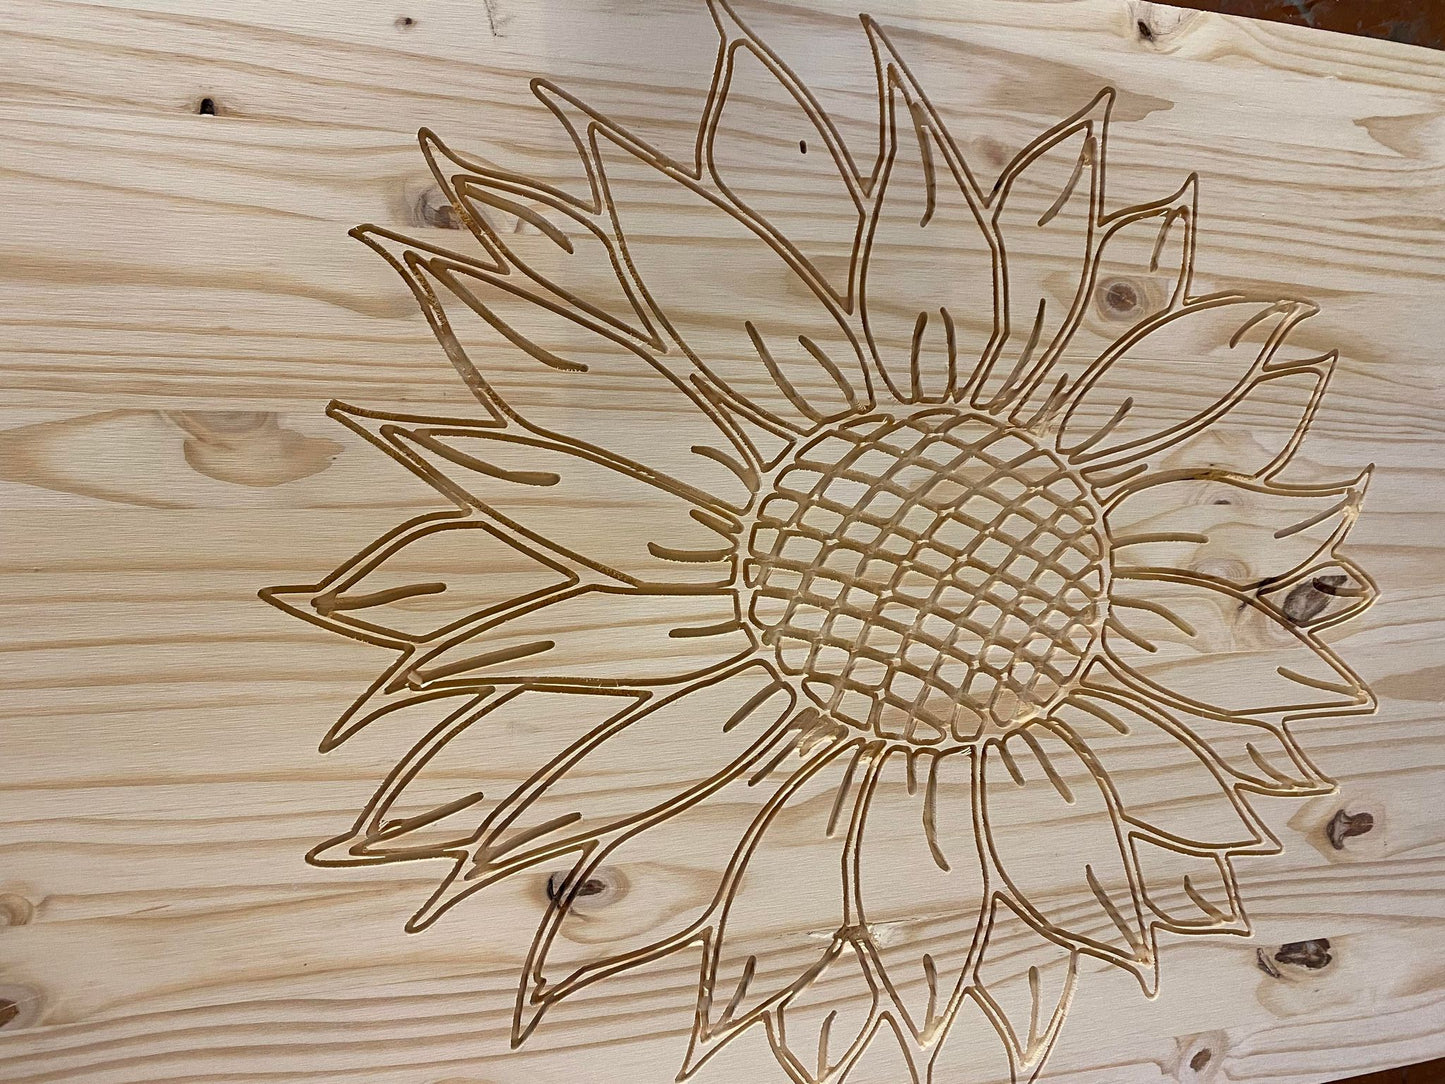 Sunflower Art Cutting Board - Bamboo Wine and Cheese Tray Engraved